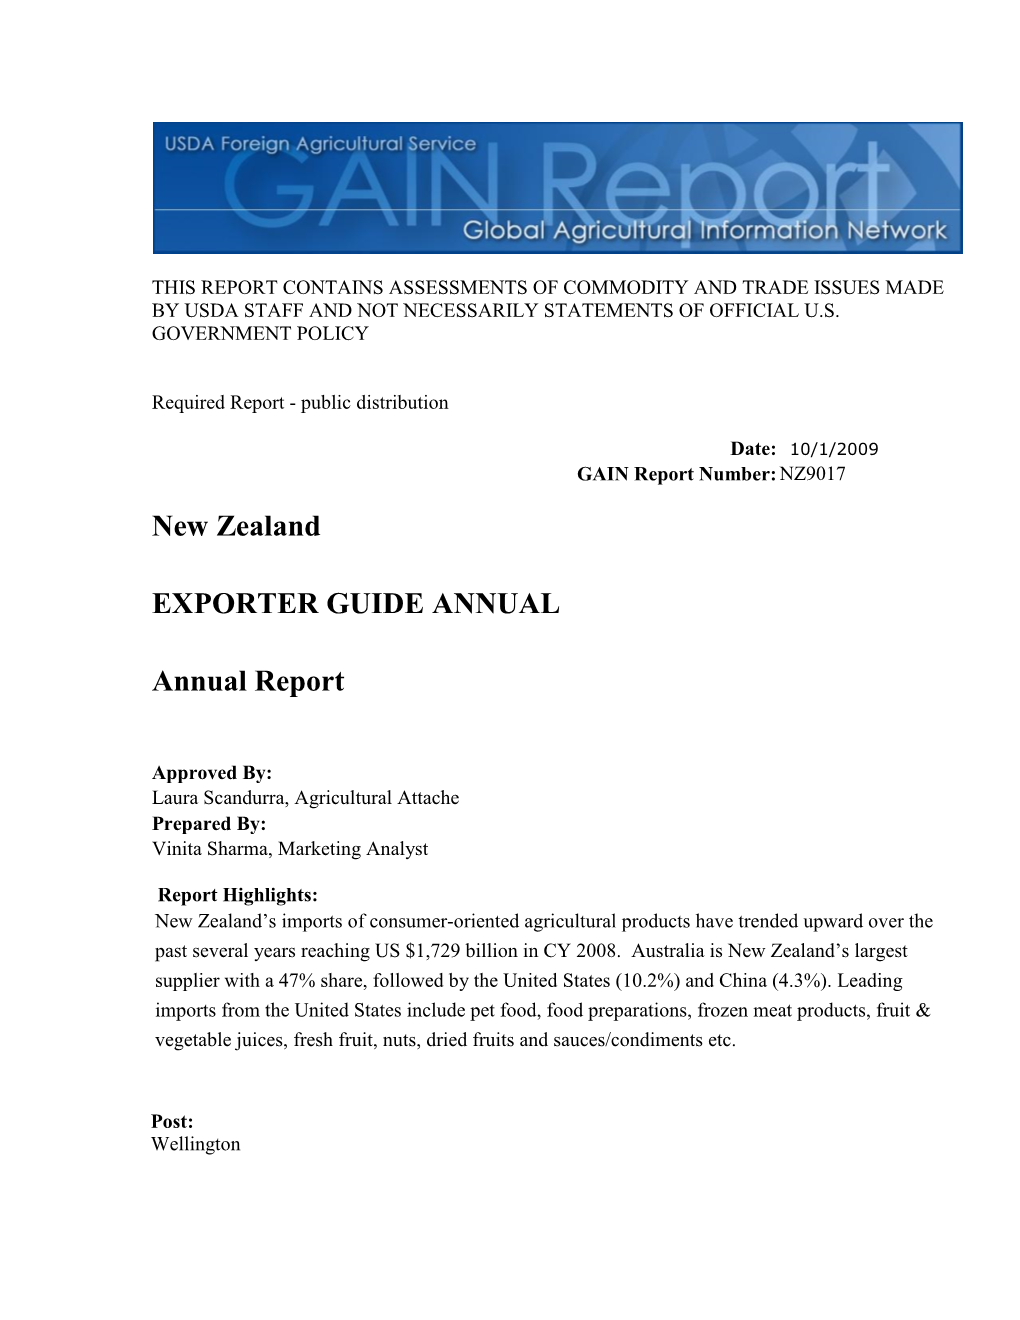 New Zealand EXPORTER GUIDE ANNUAL Annual Report